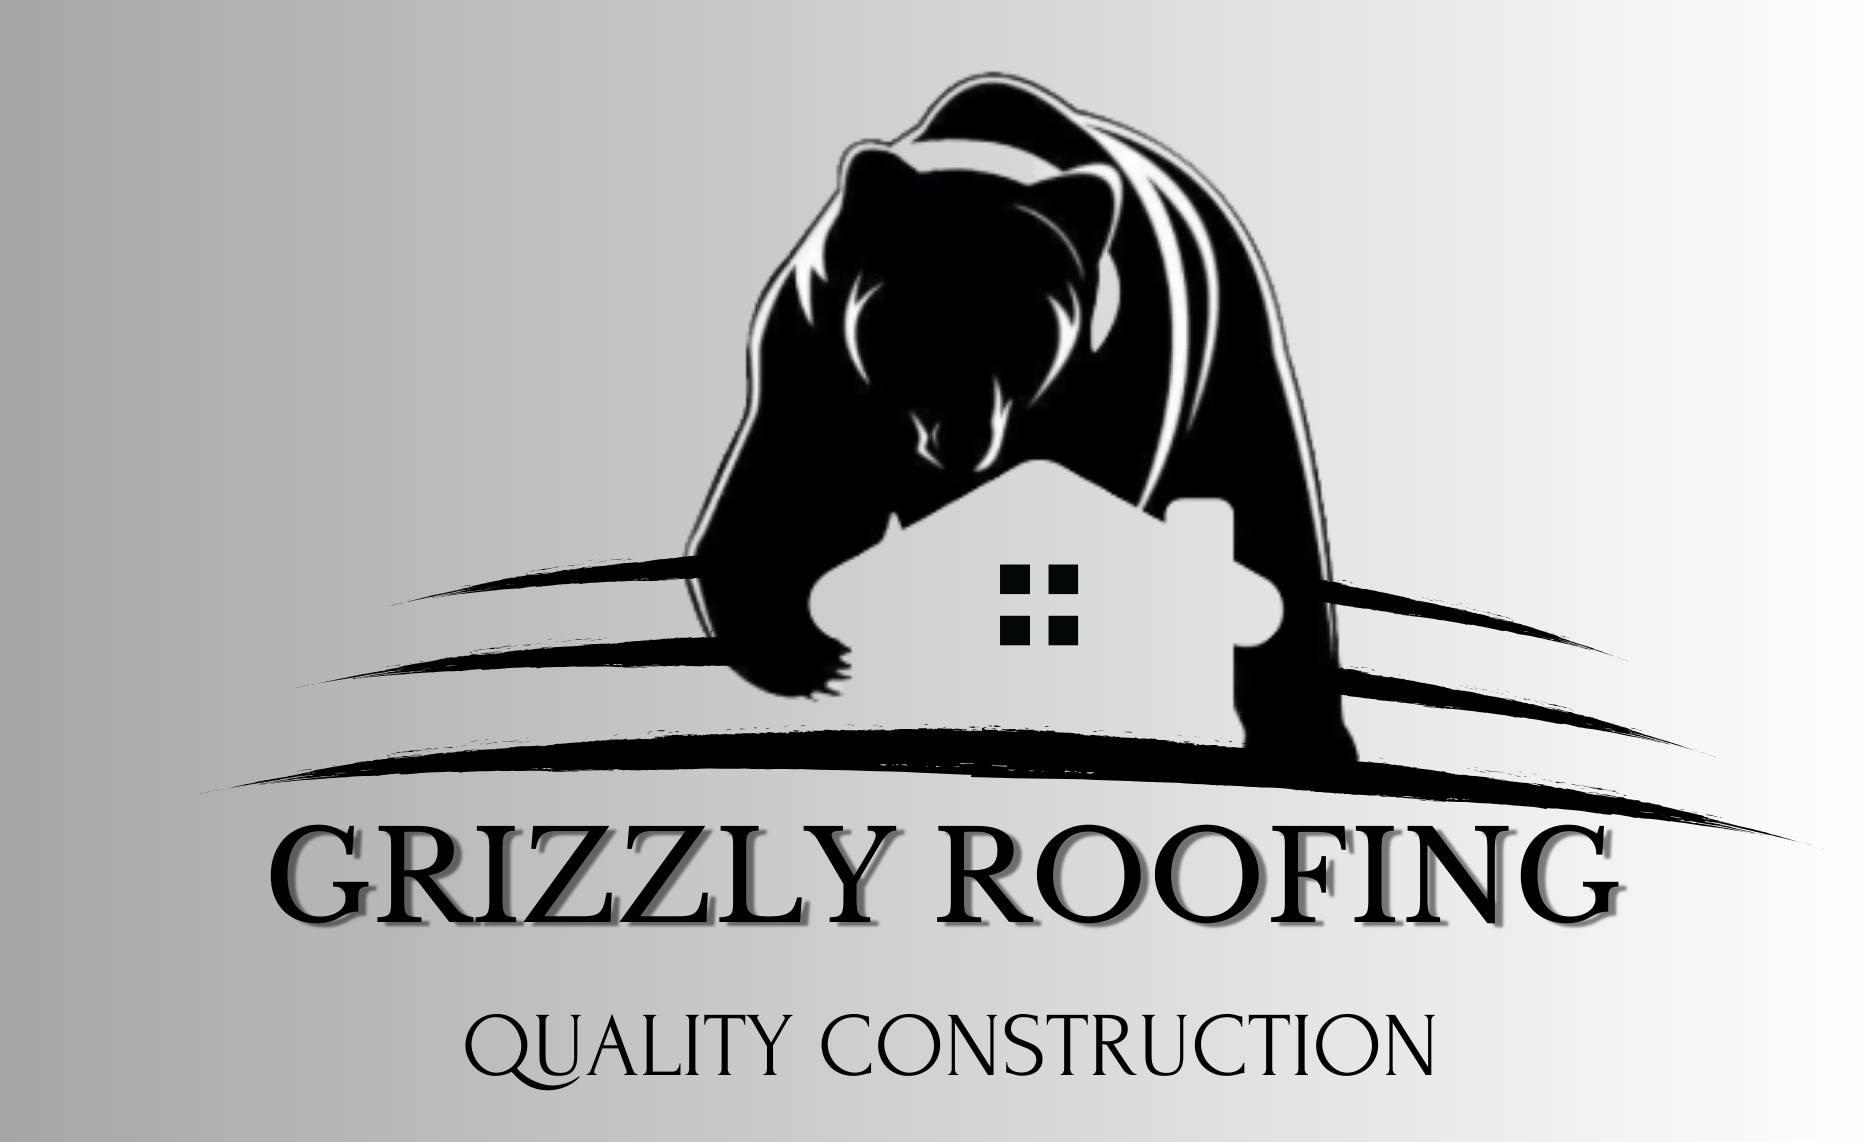 Grizzly Roofing